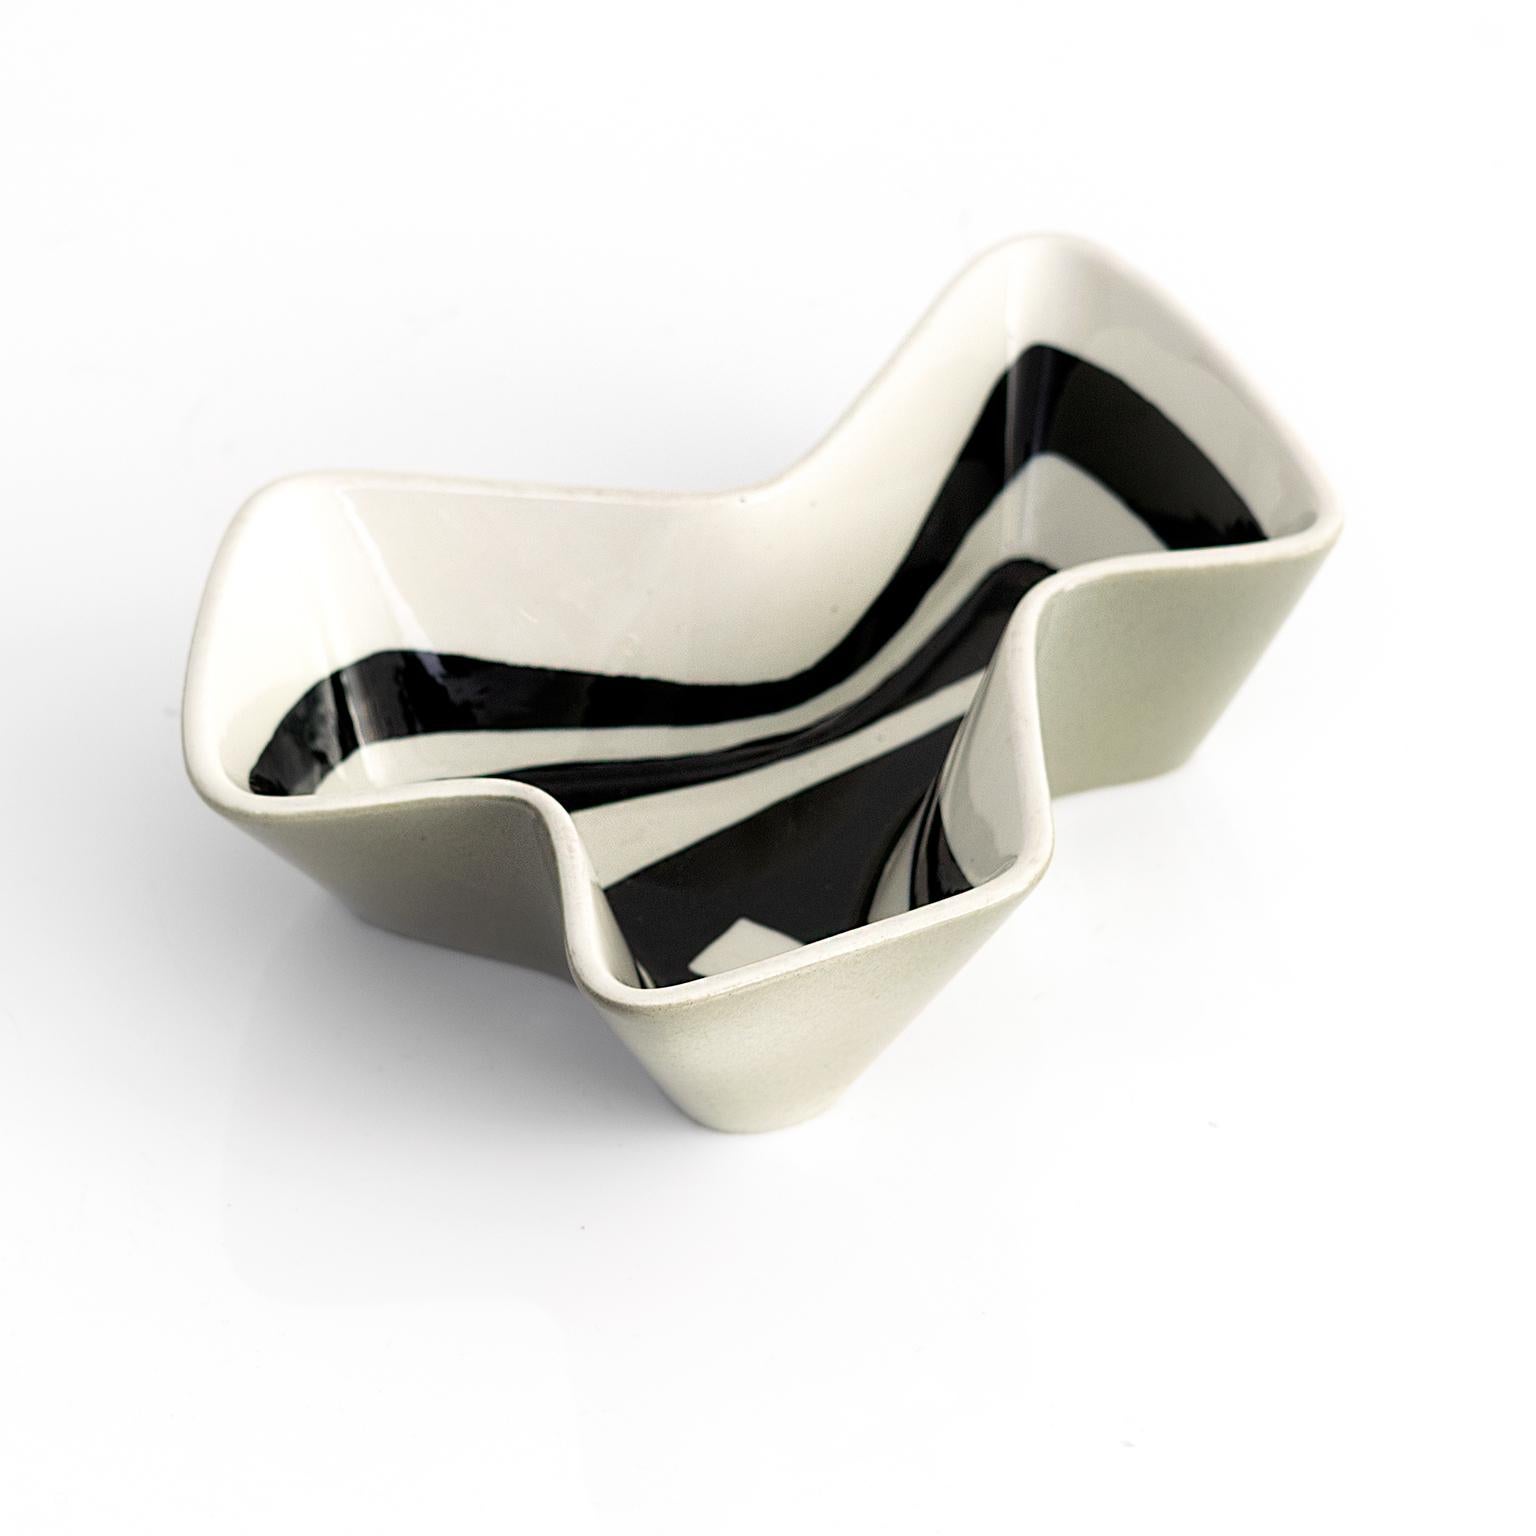 Carl-Harry Stalhane Geometric Bowl and Vase, Rorstrand, Sweden 1950 For Sale 4